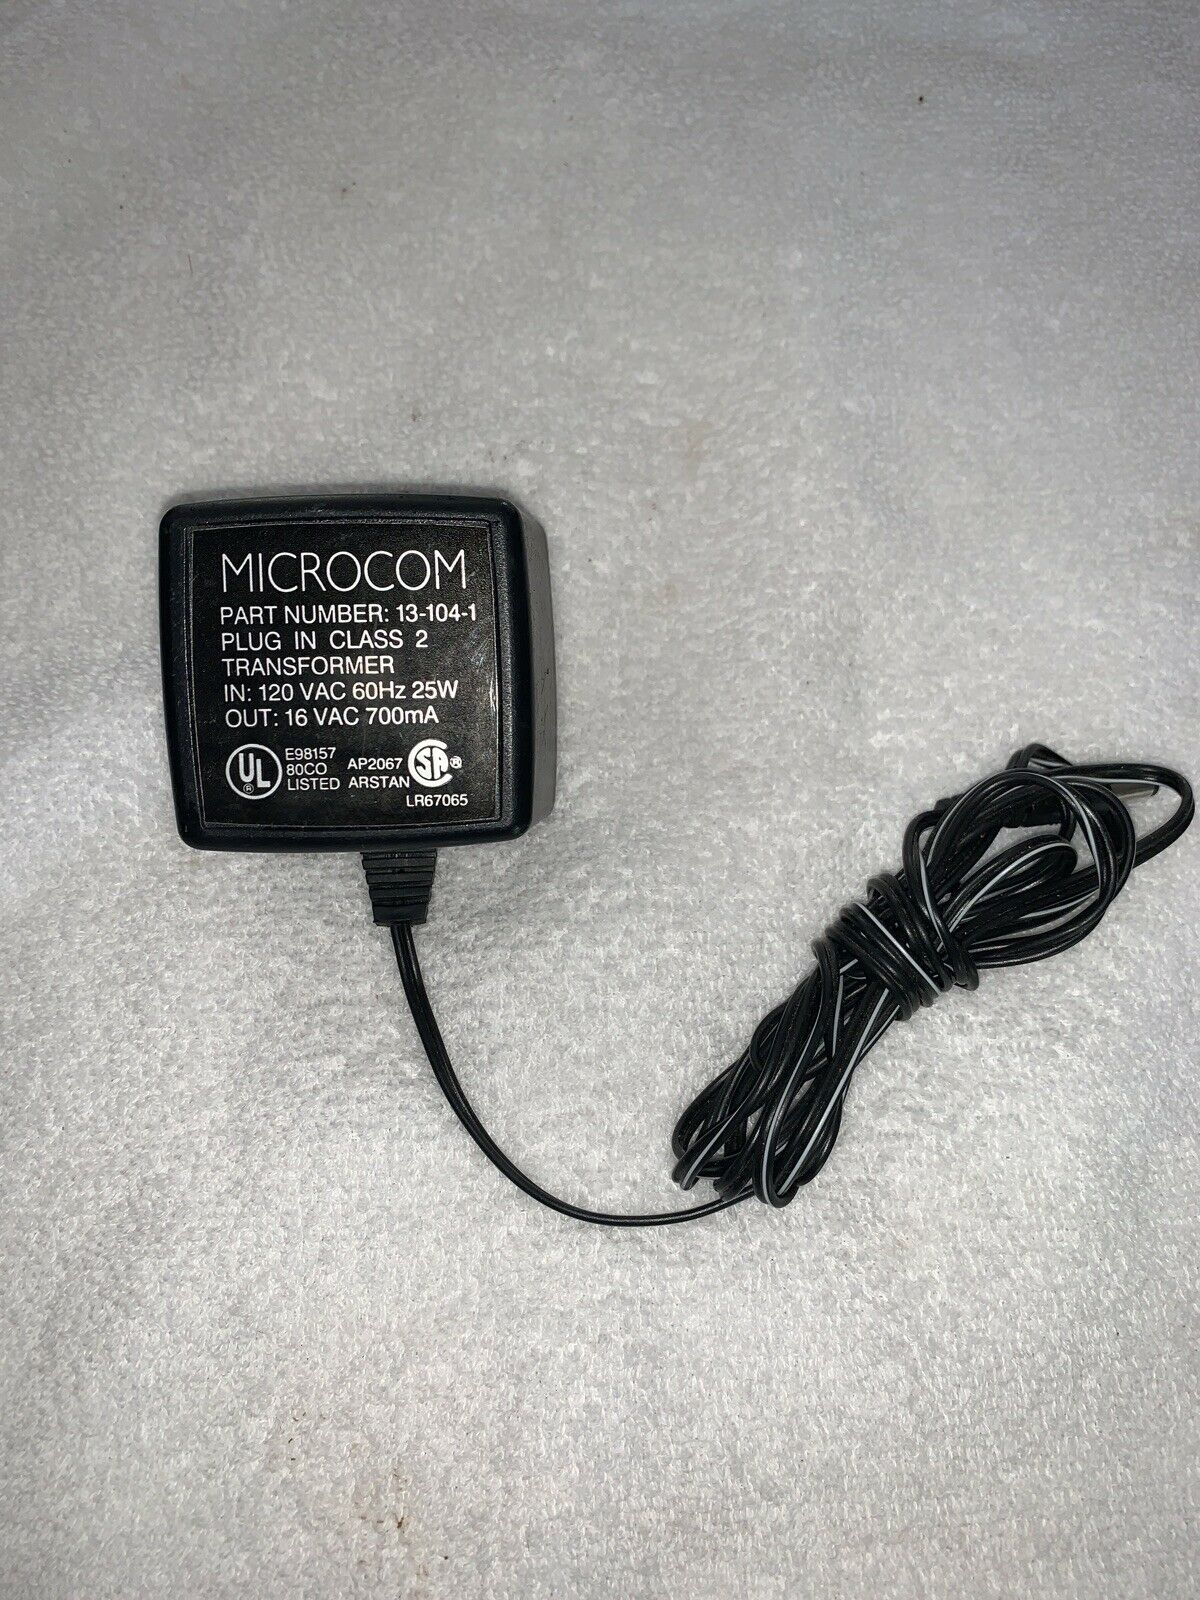 Microcom 13-104-1 Plug-In Class 2 Transformer AC Adapter Output 19V AC 600mA Connection Split/Duplication: 1:3 Type: - Click Image to Close